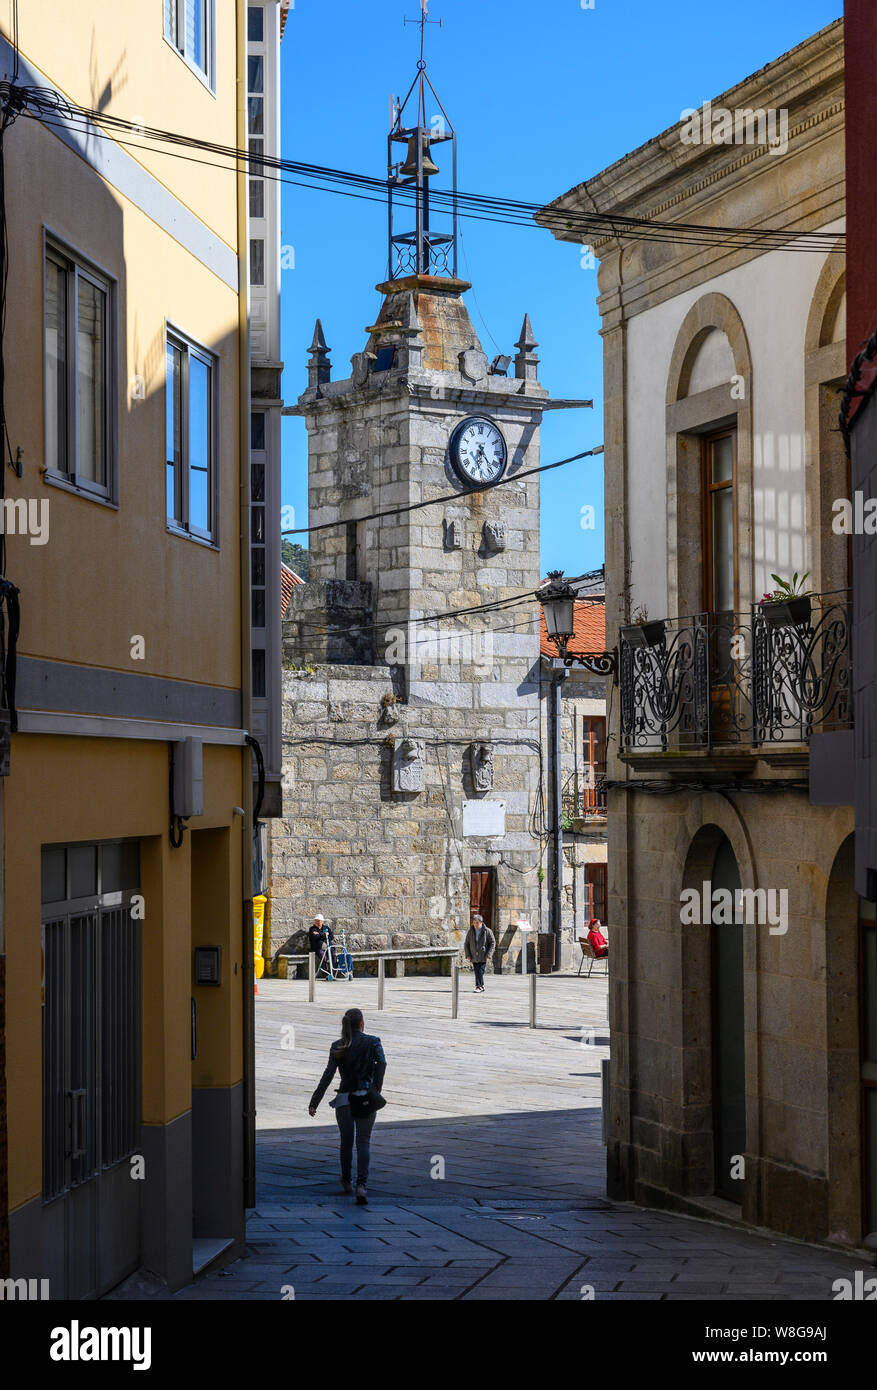 The  Torre del Reloj, clock tower, and the Praza Do Relo in the town of A Guarda, Pontevedra Province, Galicia, North West Spain. Stock Photo